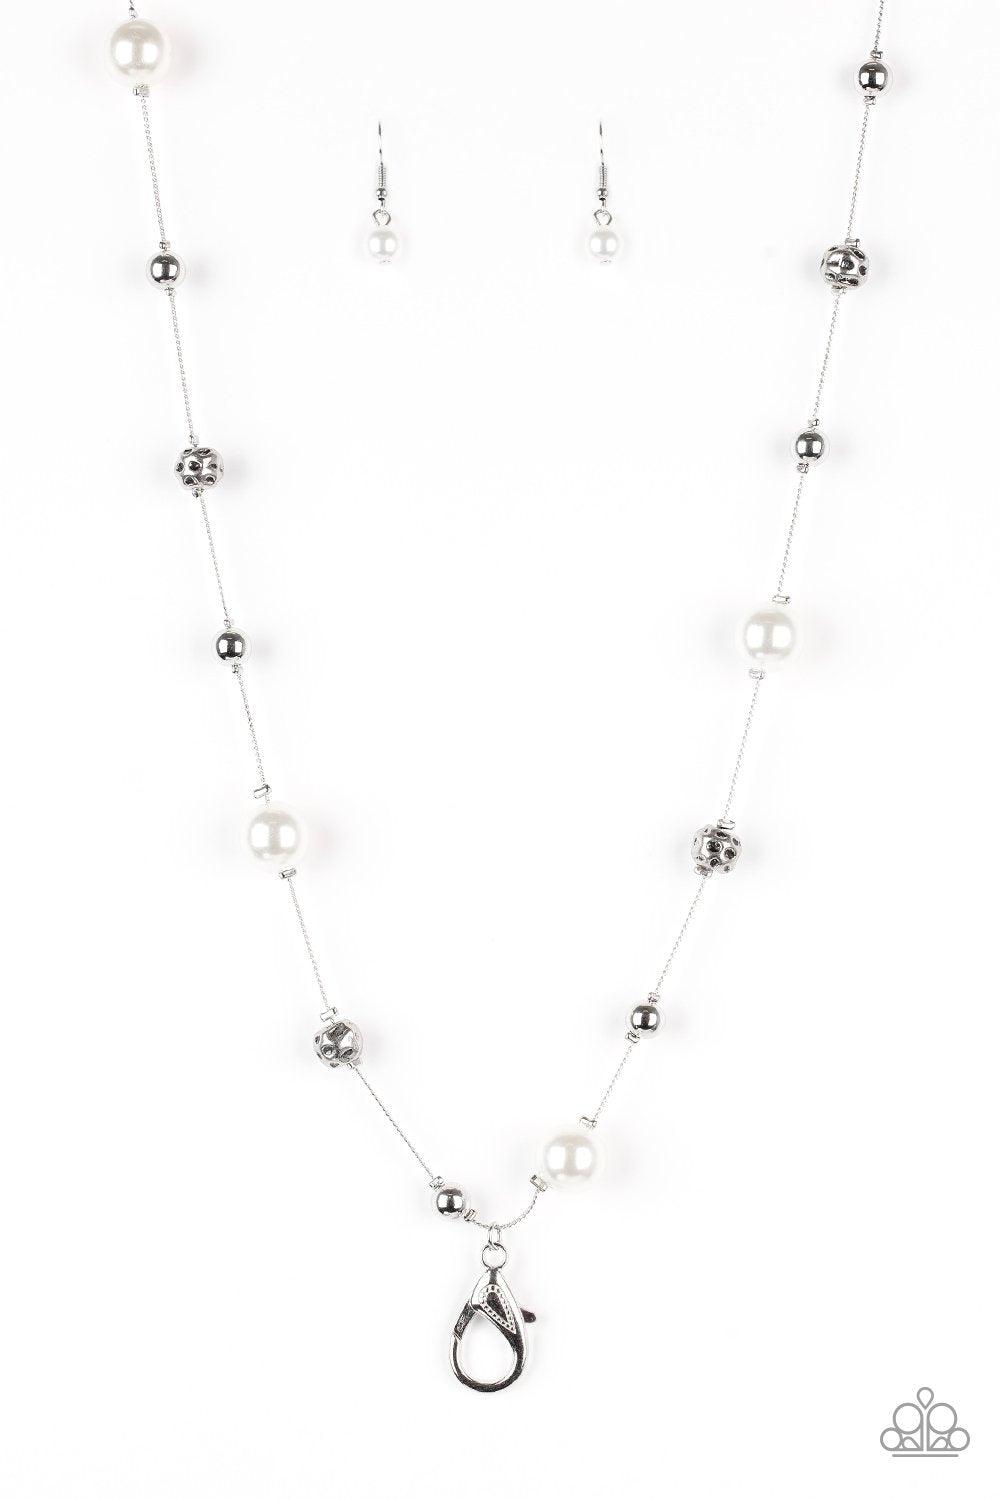 Eloquently Eloquent Silver and White Pearl Lanyard Necklace - Paparazzi Accessories-CarasShop.com - $5 Jewelry by Cara Jewels